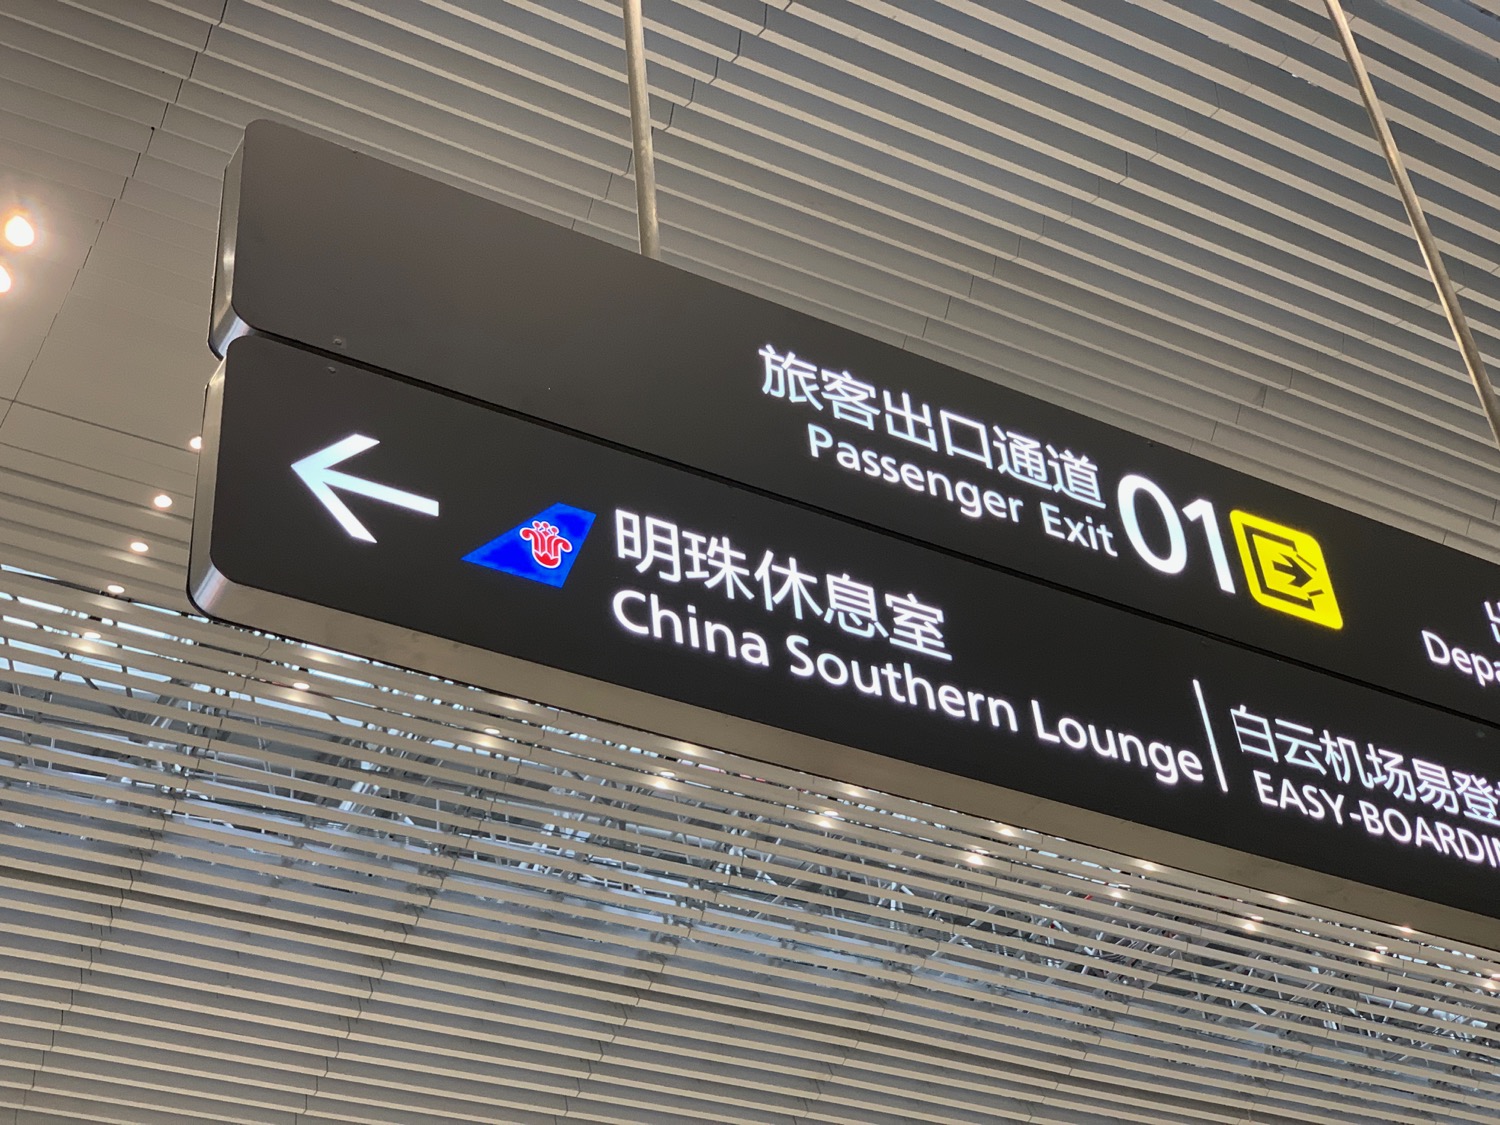 a sign with a direction and a passenger exit